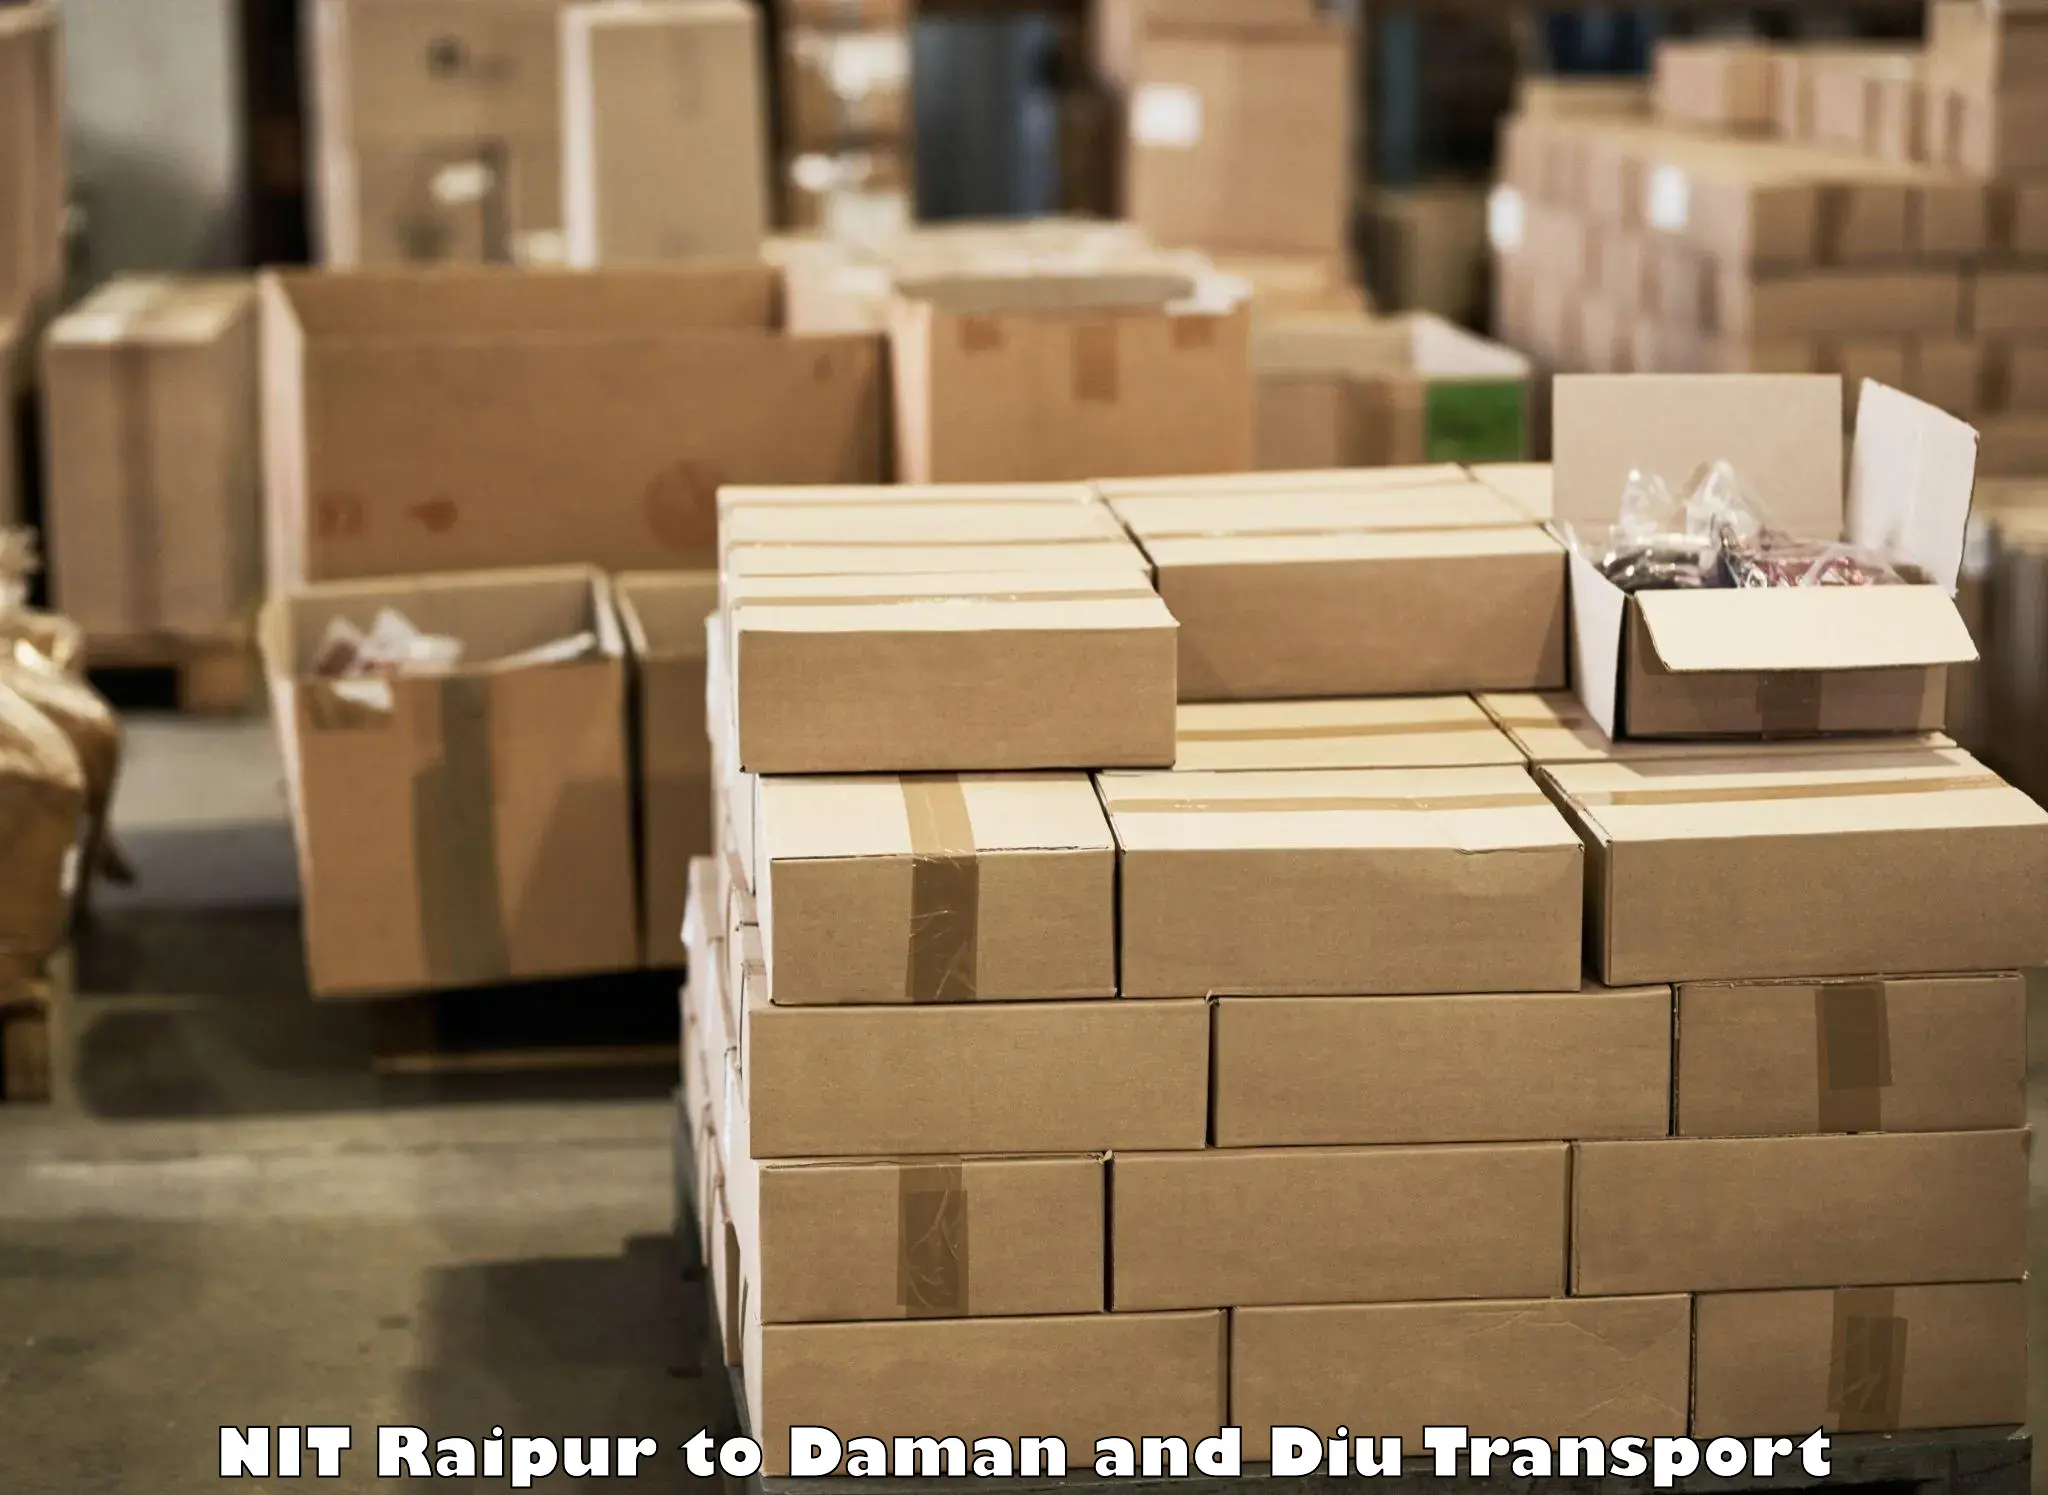 Daily parcel service transport NIT Raipur to Daman and Diu